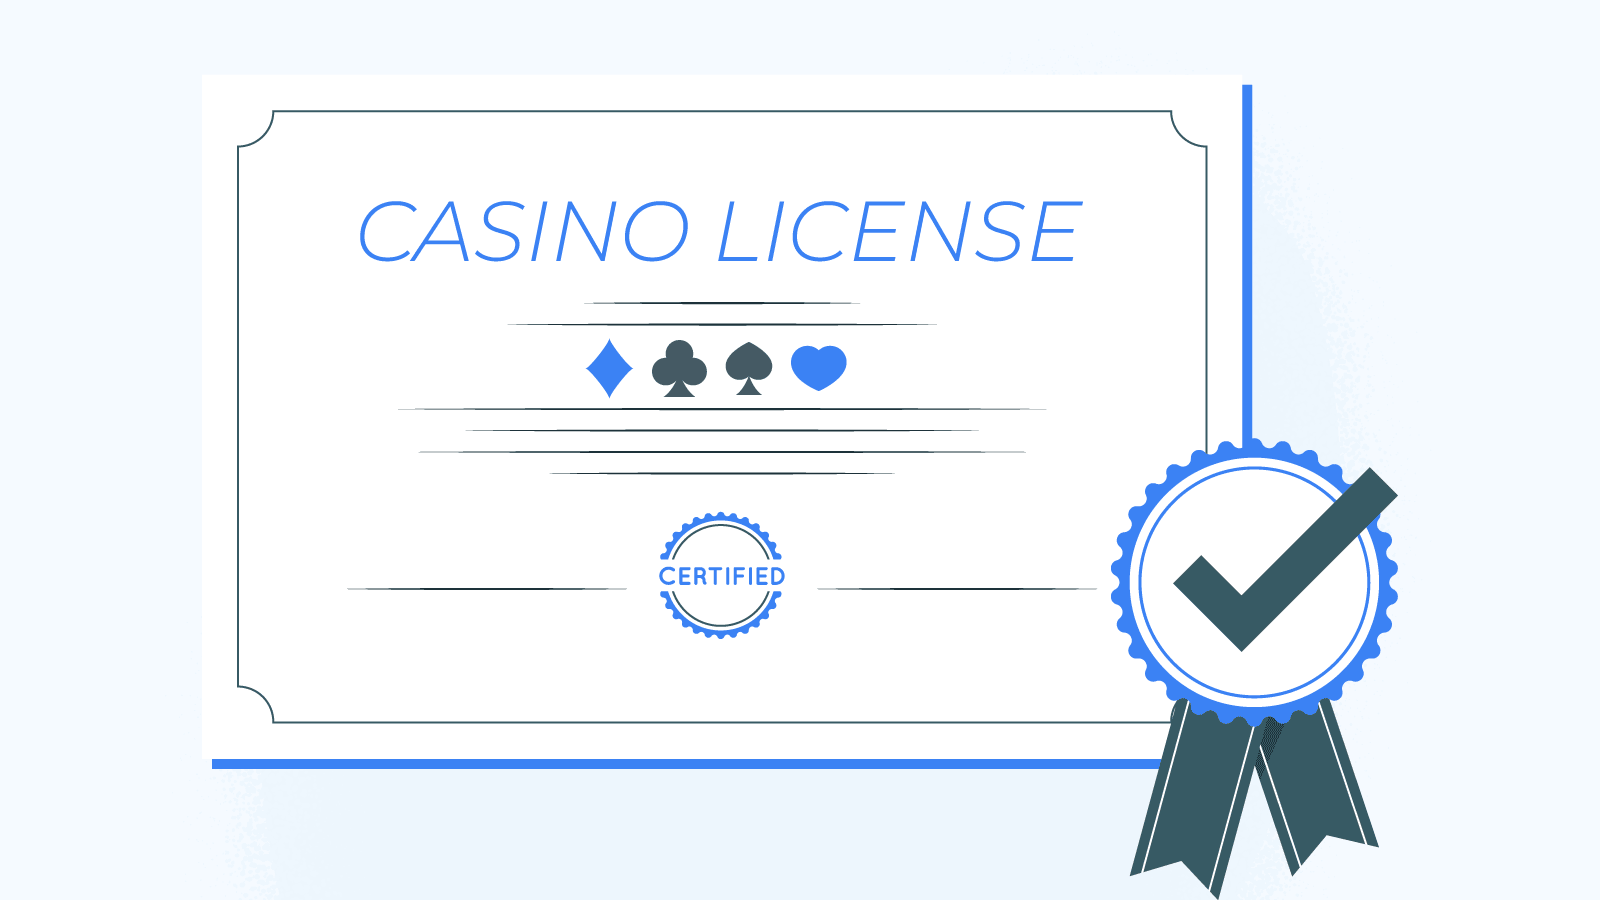 Know that you play at a licensed casino